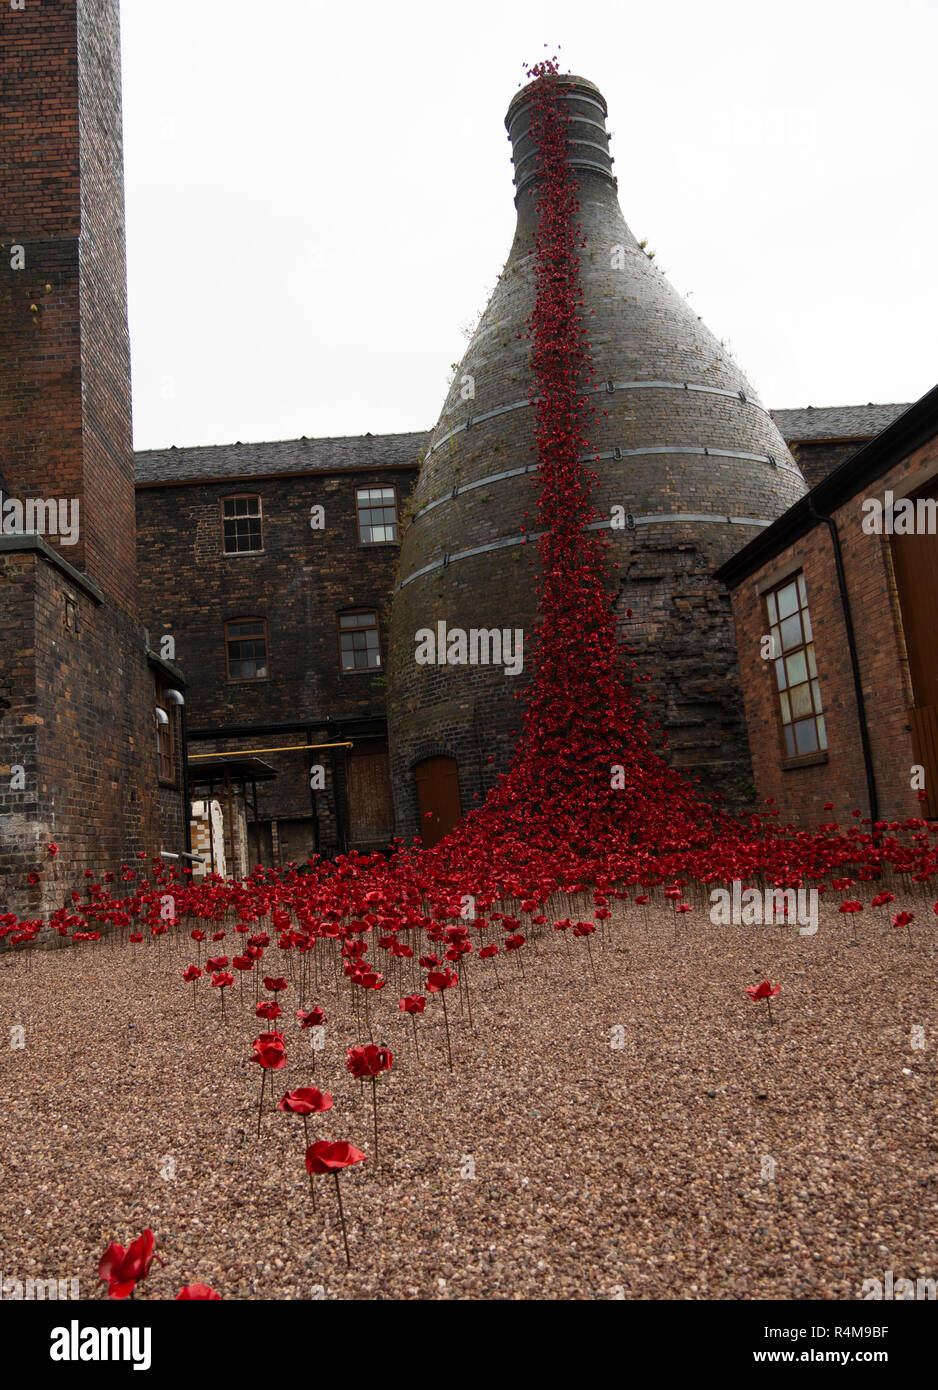 Weeping window, Middleport pottery, Stoke-on-Trent 2018, art installation commemorating 100th anniversary of the end of WW1 Stock Photo